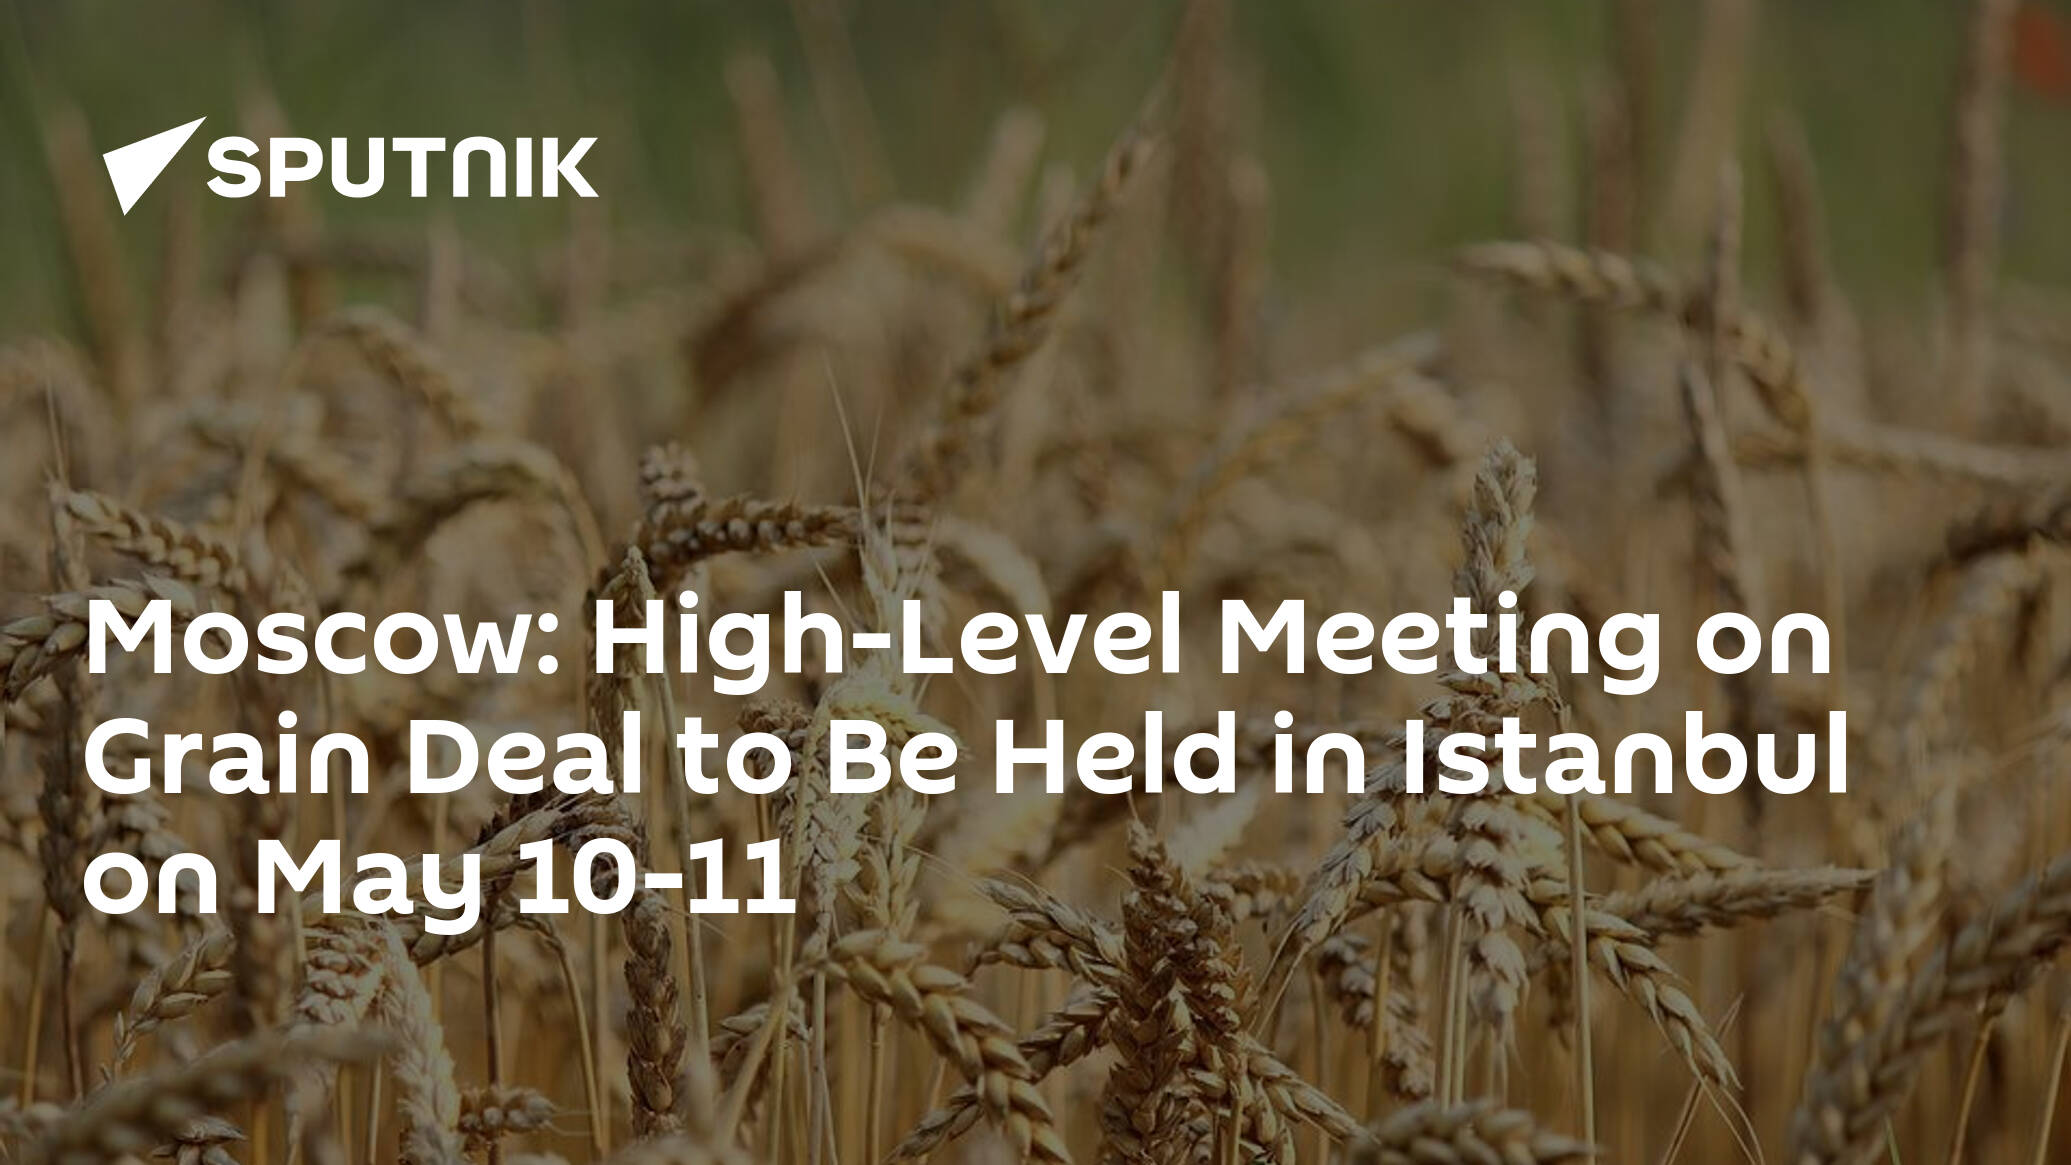 Moscow: High-Level Meeting on Grain Deal to Be Held in Istanbul on May 10-11